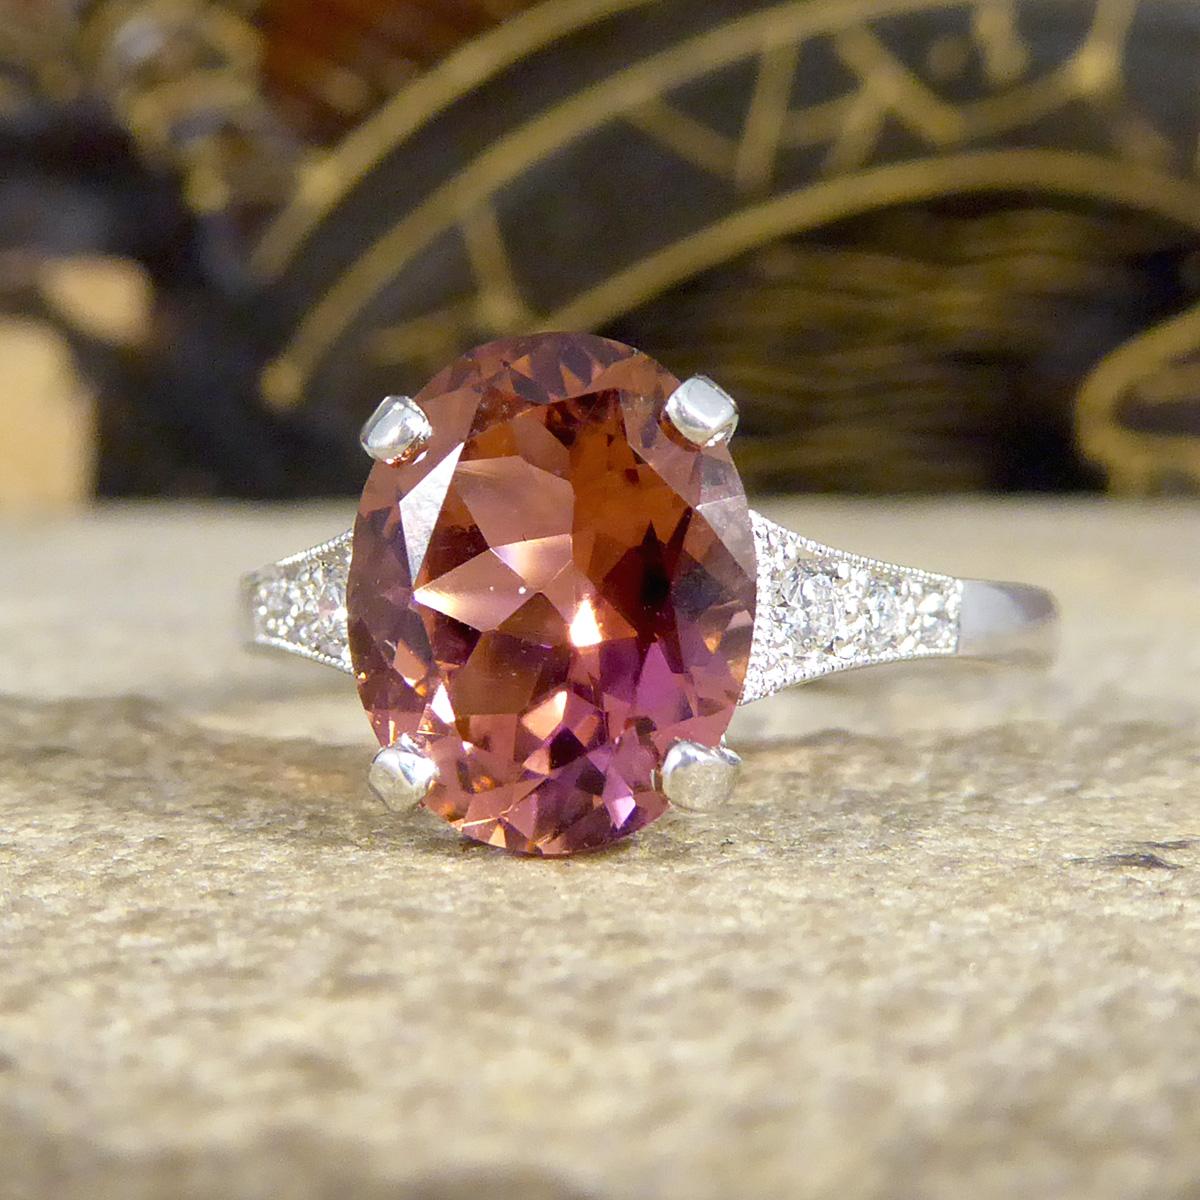 Premium Period Deco Replica 2.38ct Pink Tourmaline Diamond Ring 18ct White Gold In New Condition For Sale In Yorkshire, West Yorkshire